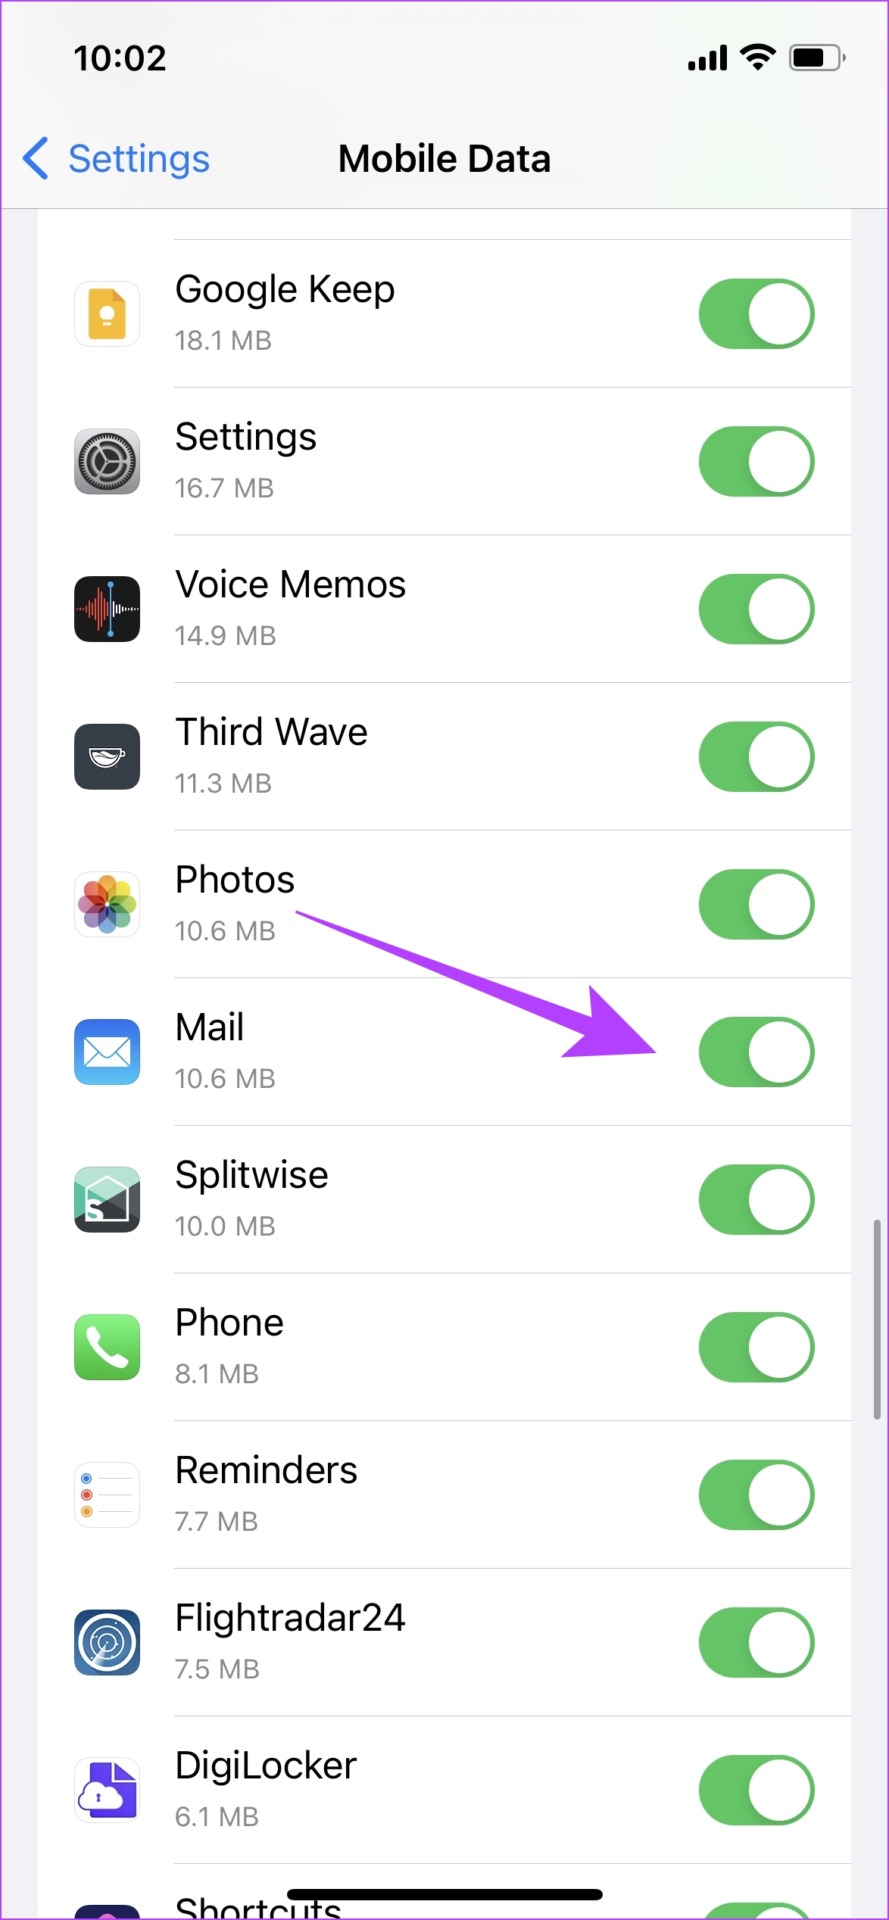 Turn on Toggle For Mail